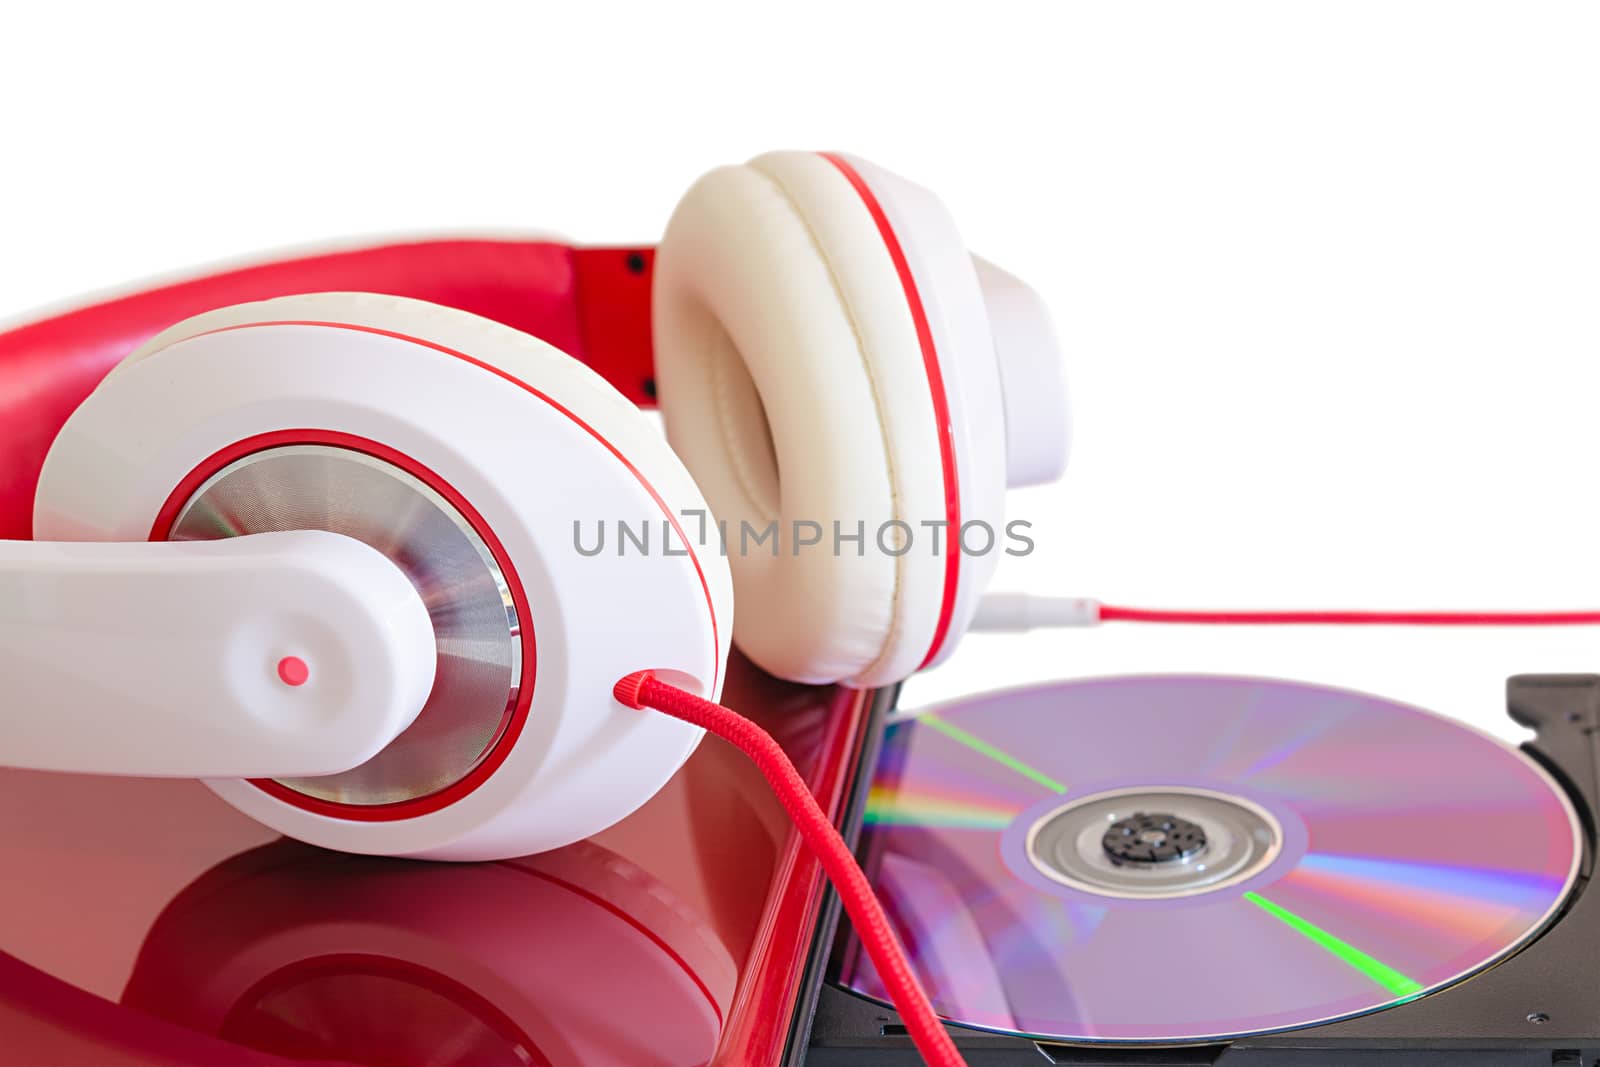 Language course learning with DVD compact disc in laptop and white red headphones on glossy notebook surface